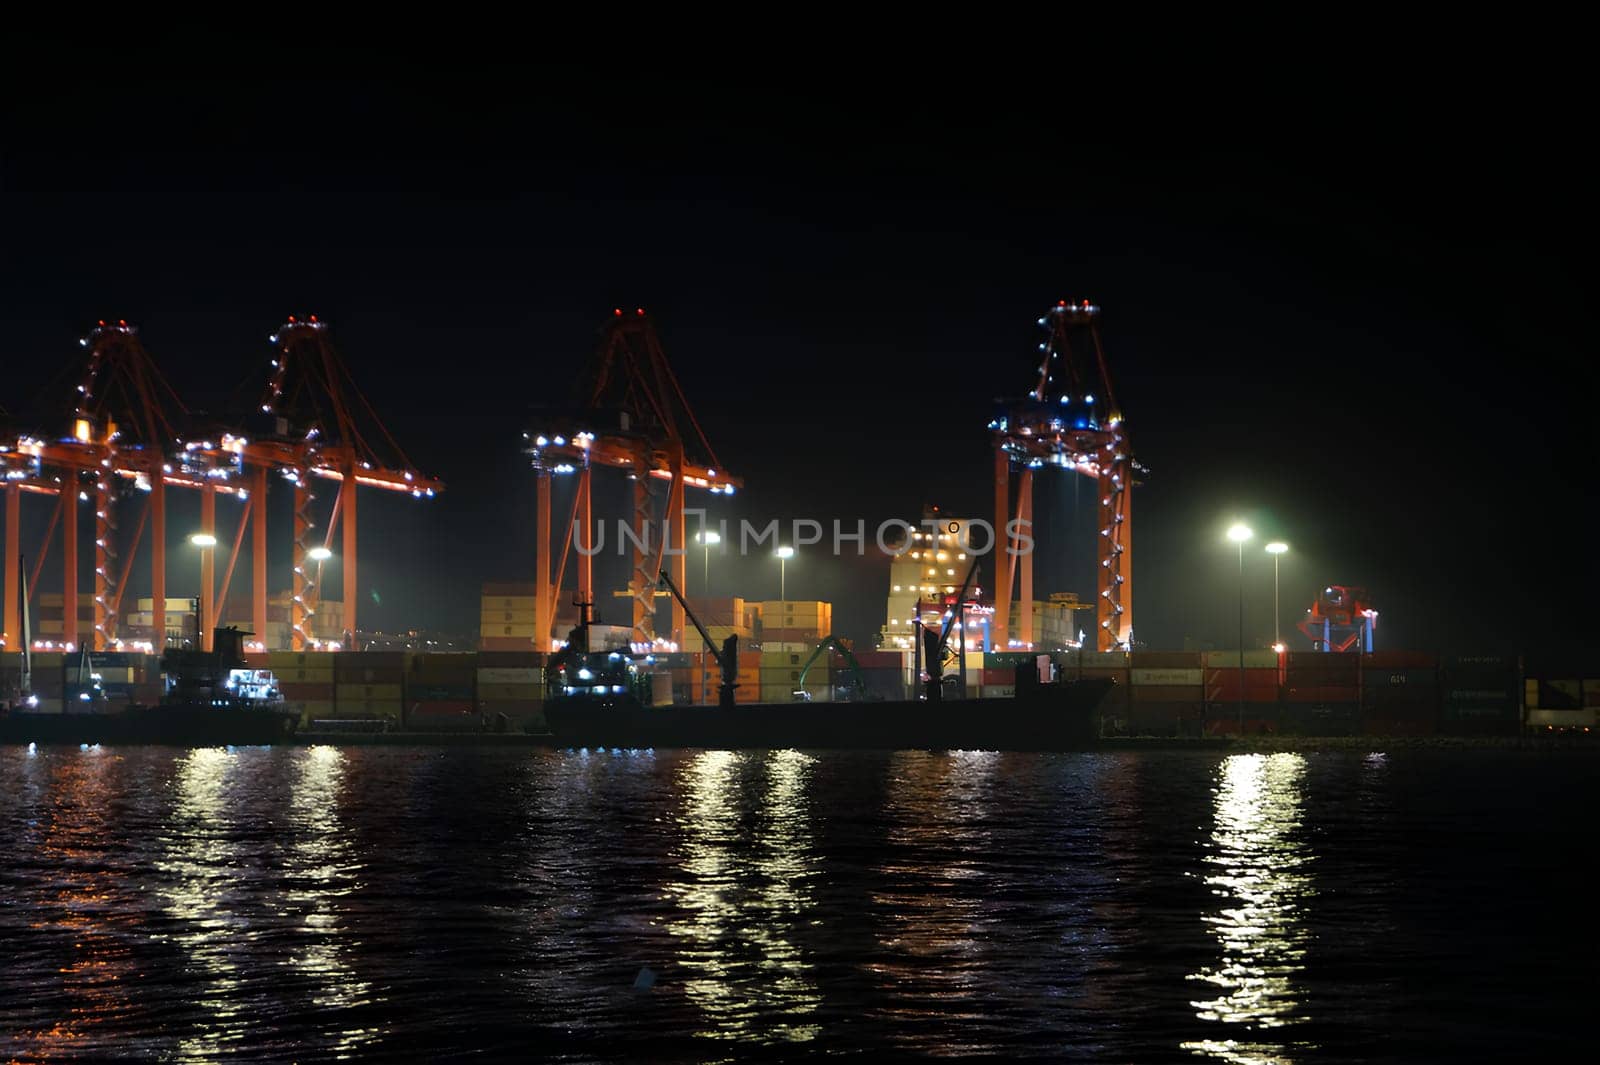 A large ship is docked at a port at night